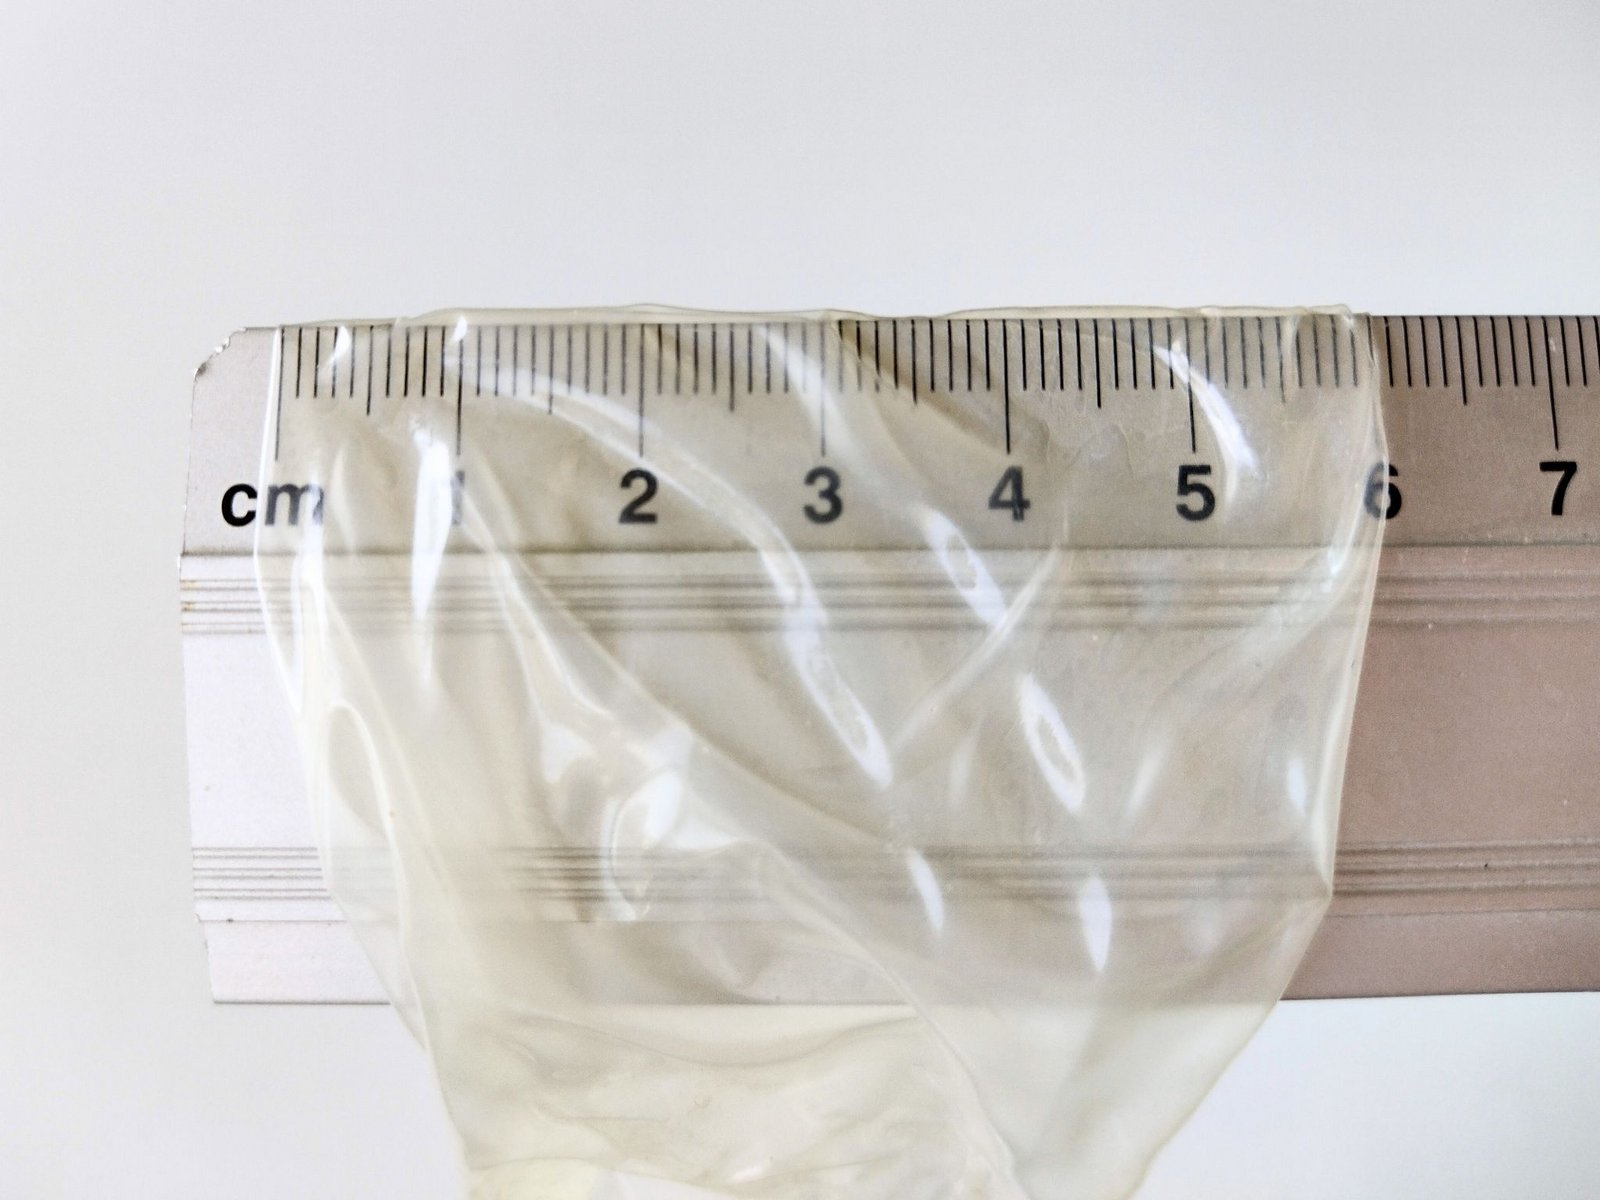 Nominal width of a condom measured with a ruler